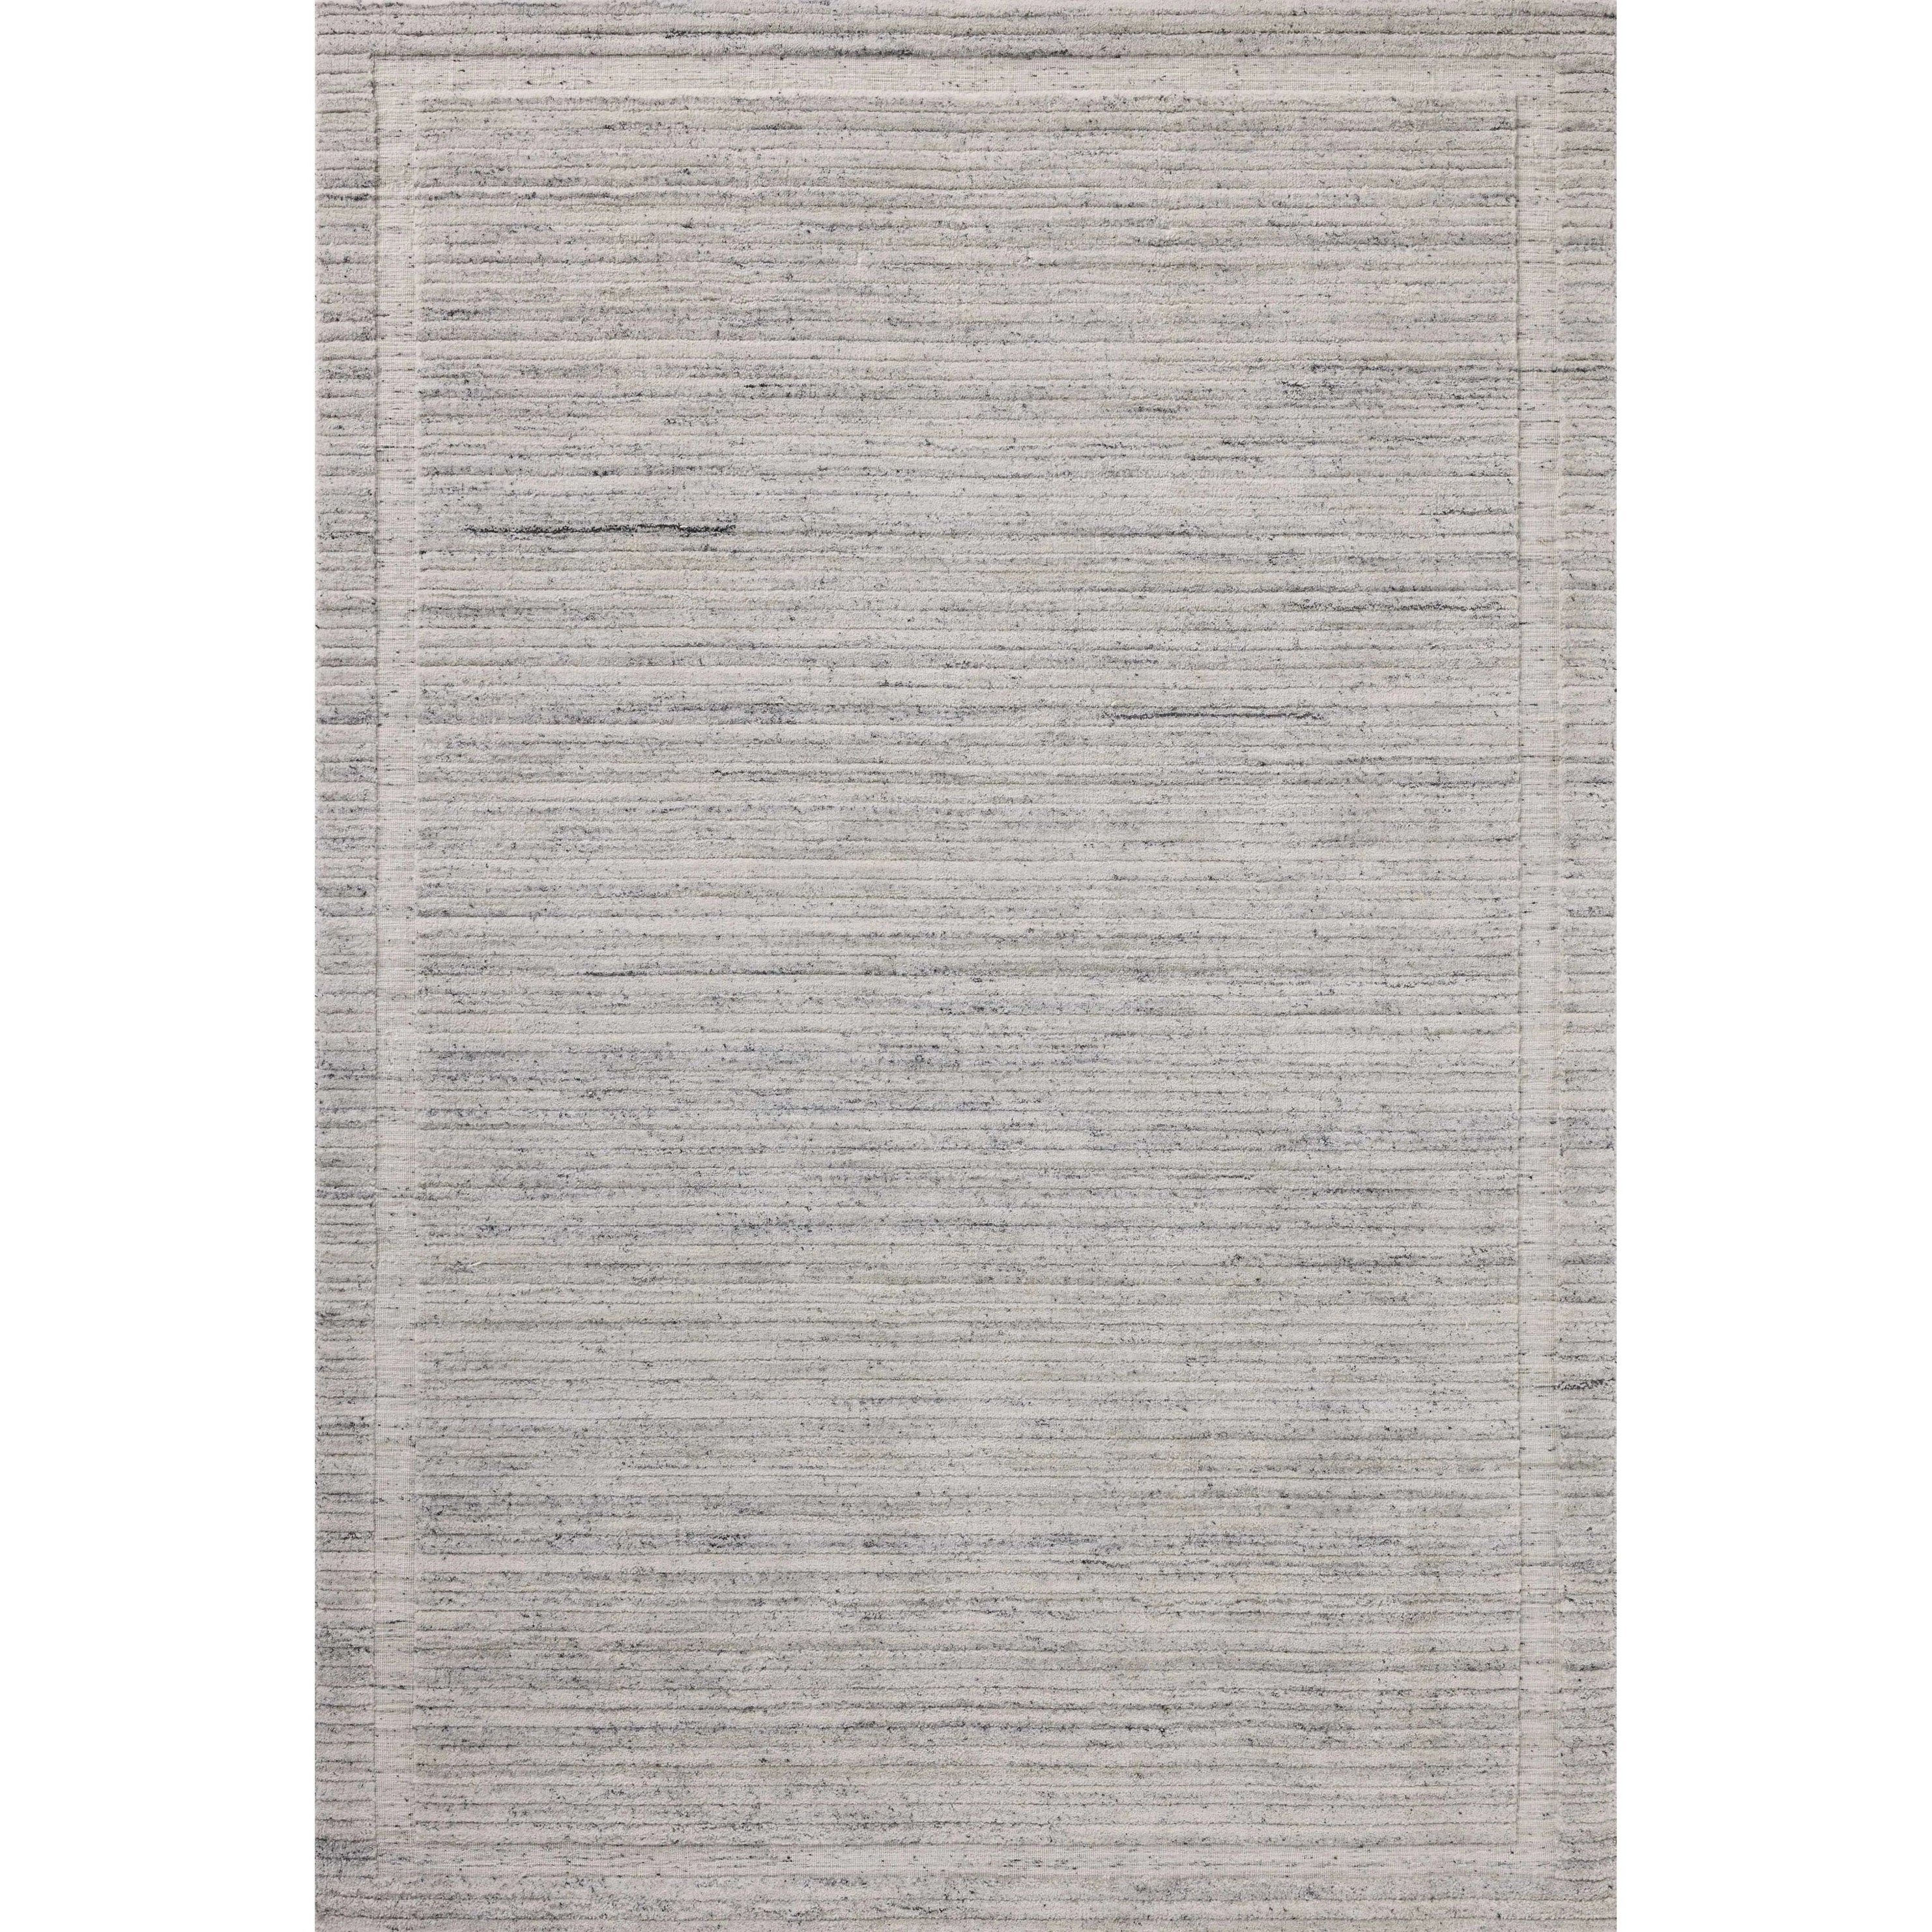 Irresistible to walk upon, the Dana Stone Rug by Brigette Romanek x Loloi has a high-low texture that alternates between a subtly shaggy pile and a soft base. Horizontal broken stripes give the area rug a fresh and energized structure, while a finish of fringe along the edges accentuates its sense of movement. Amethyst Home provides interior design, new home construction design consulting, vintage area rugs, and lighting in the Miami metro area.